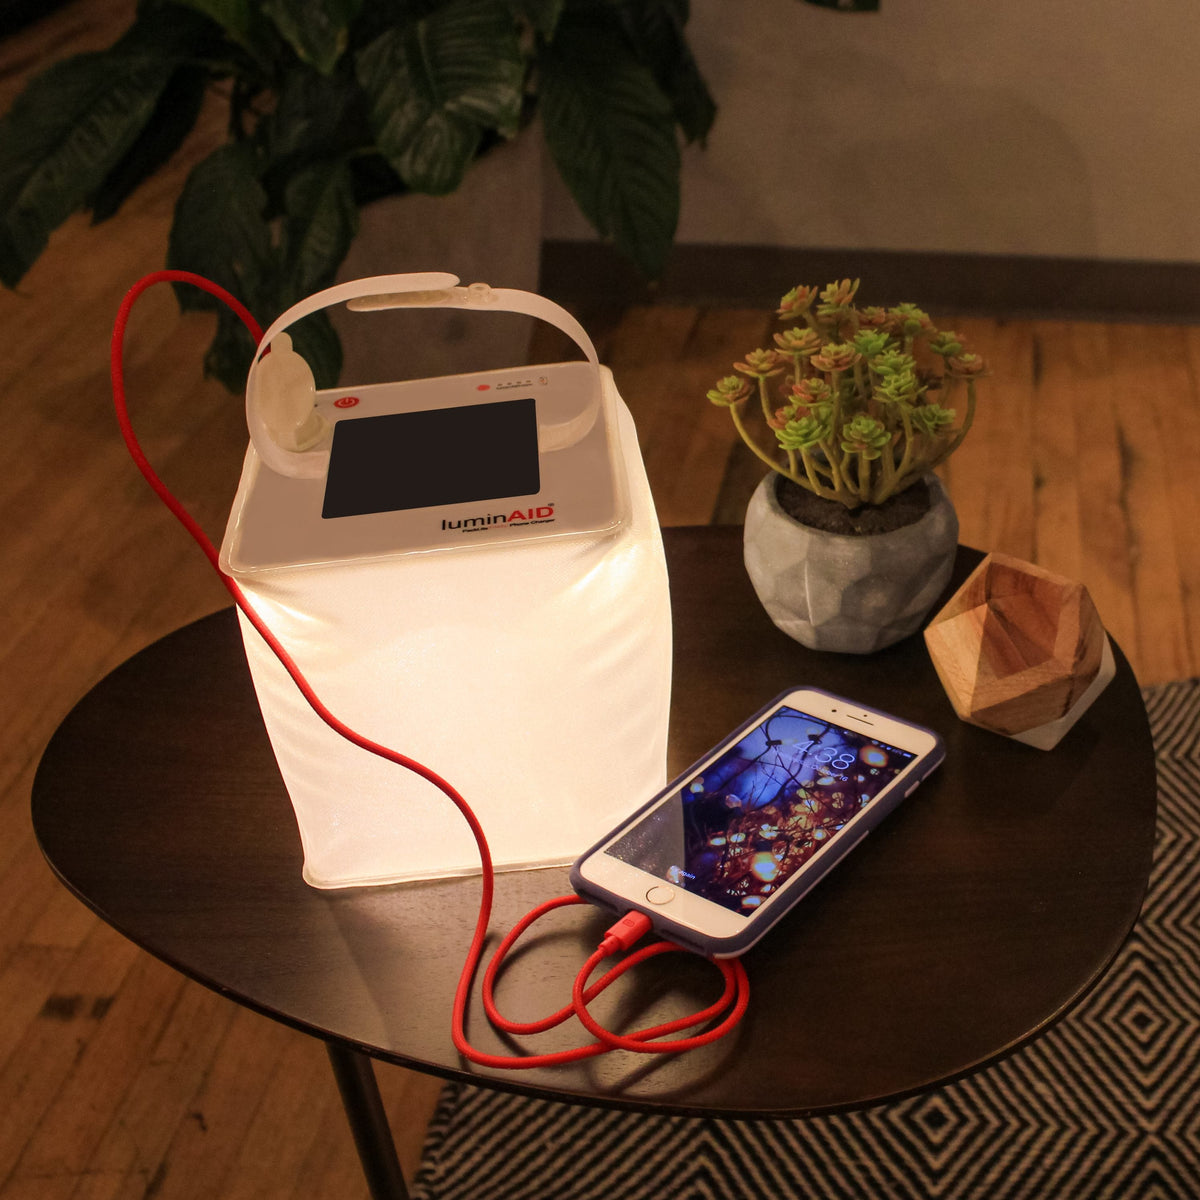 Firefly power lantern lighting up a table and charging a phone.